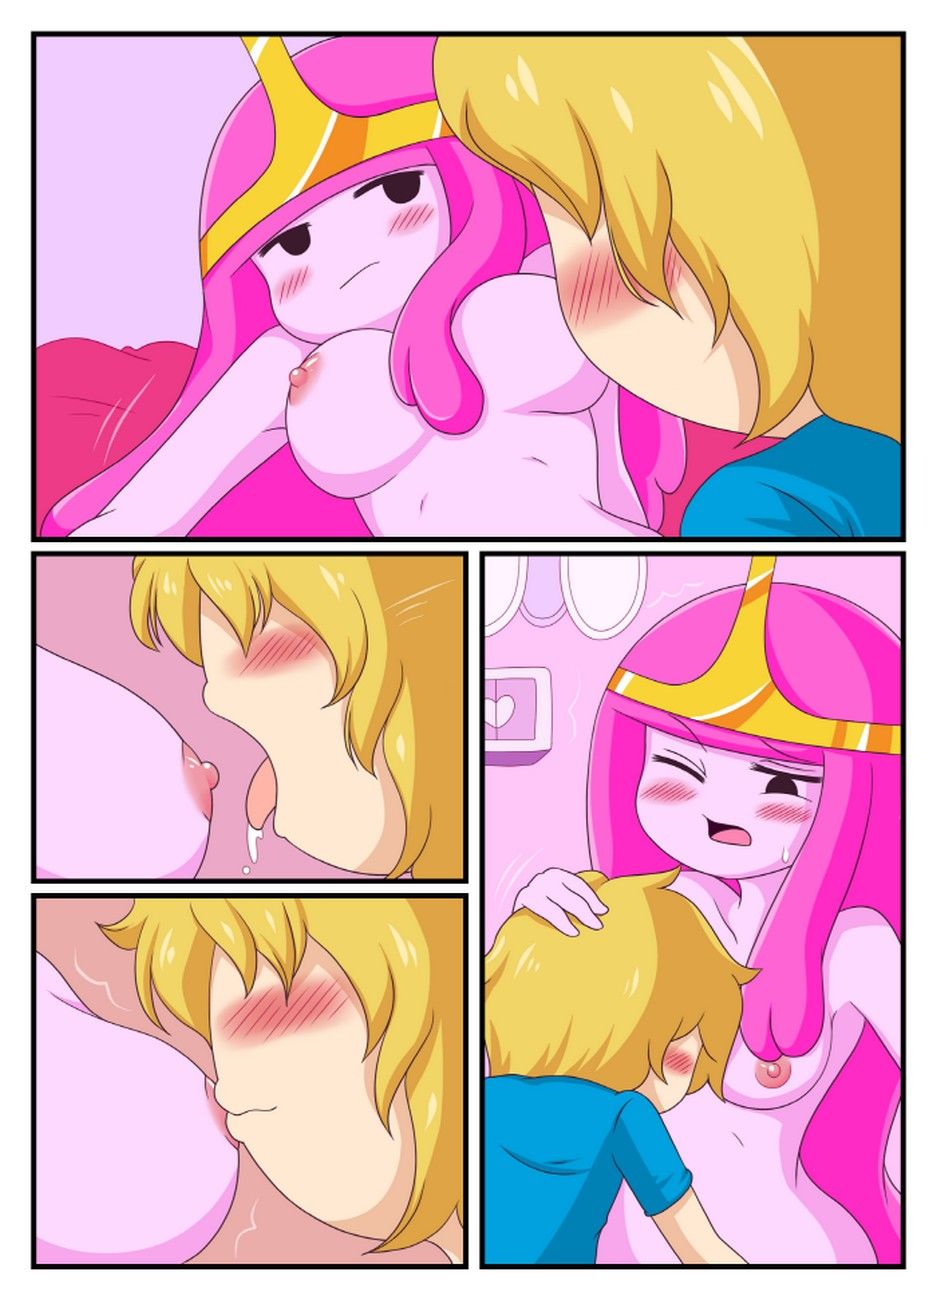 Adventure_Time_-_Adult_Time_1 comix_43449.jpg